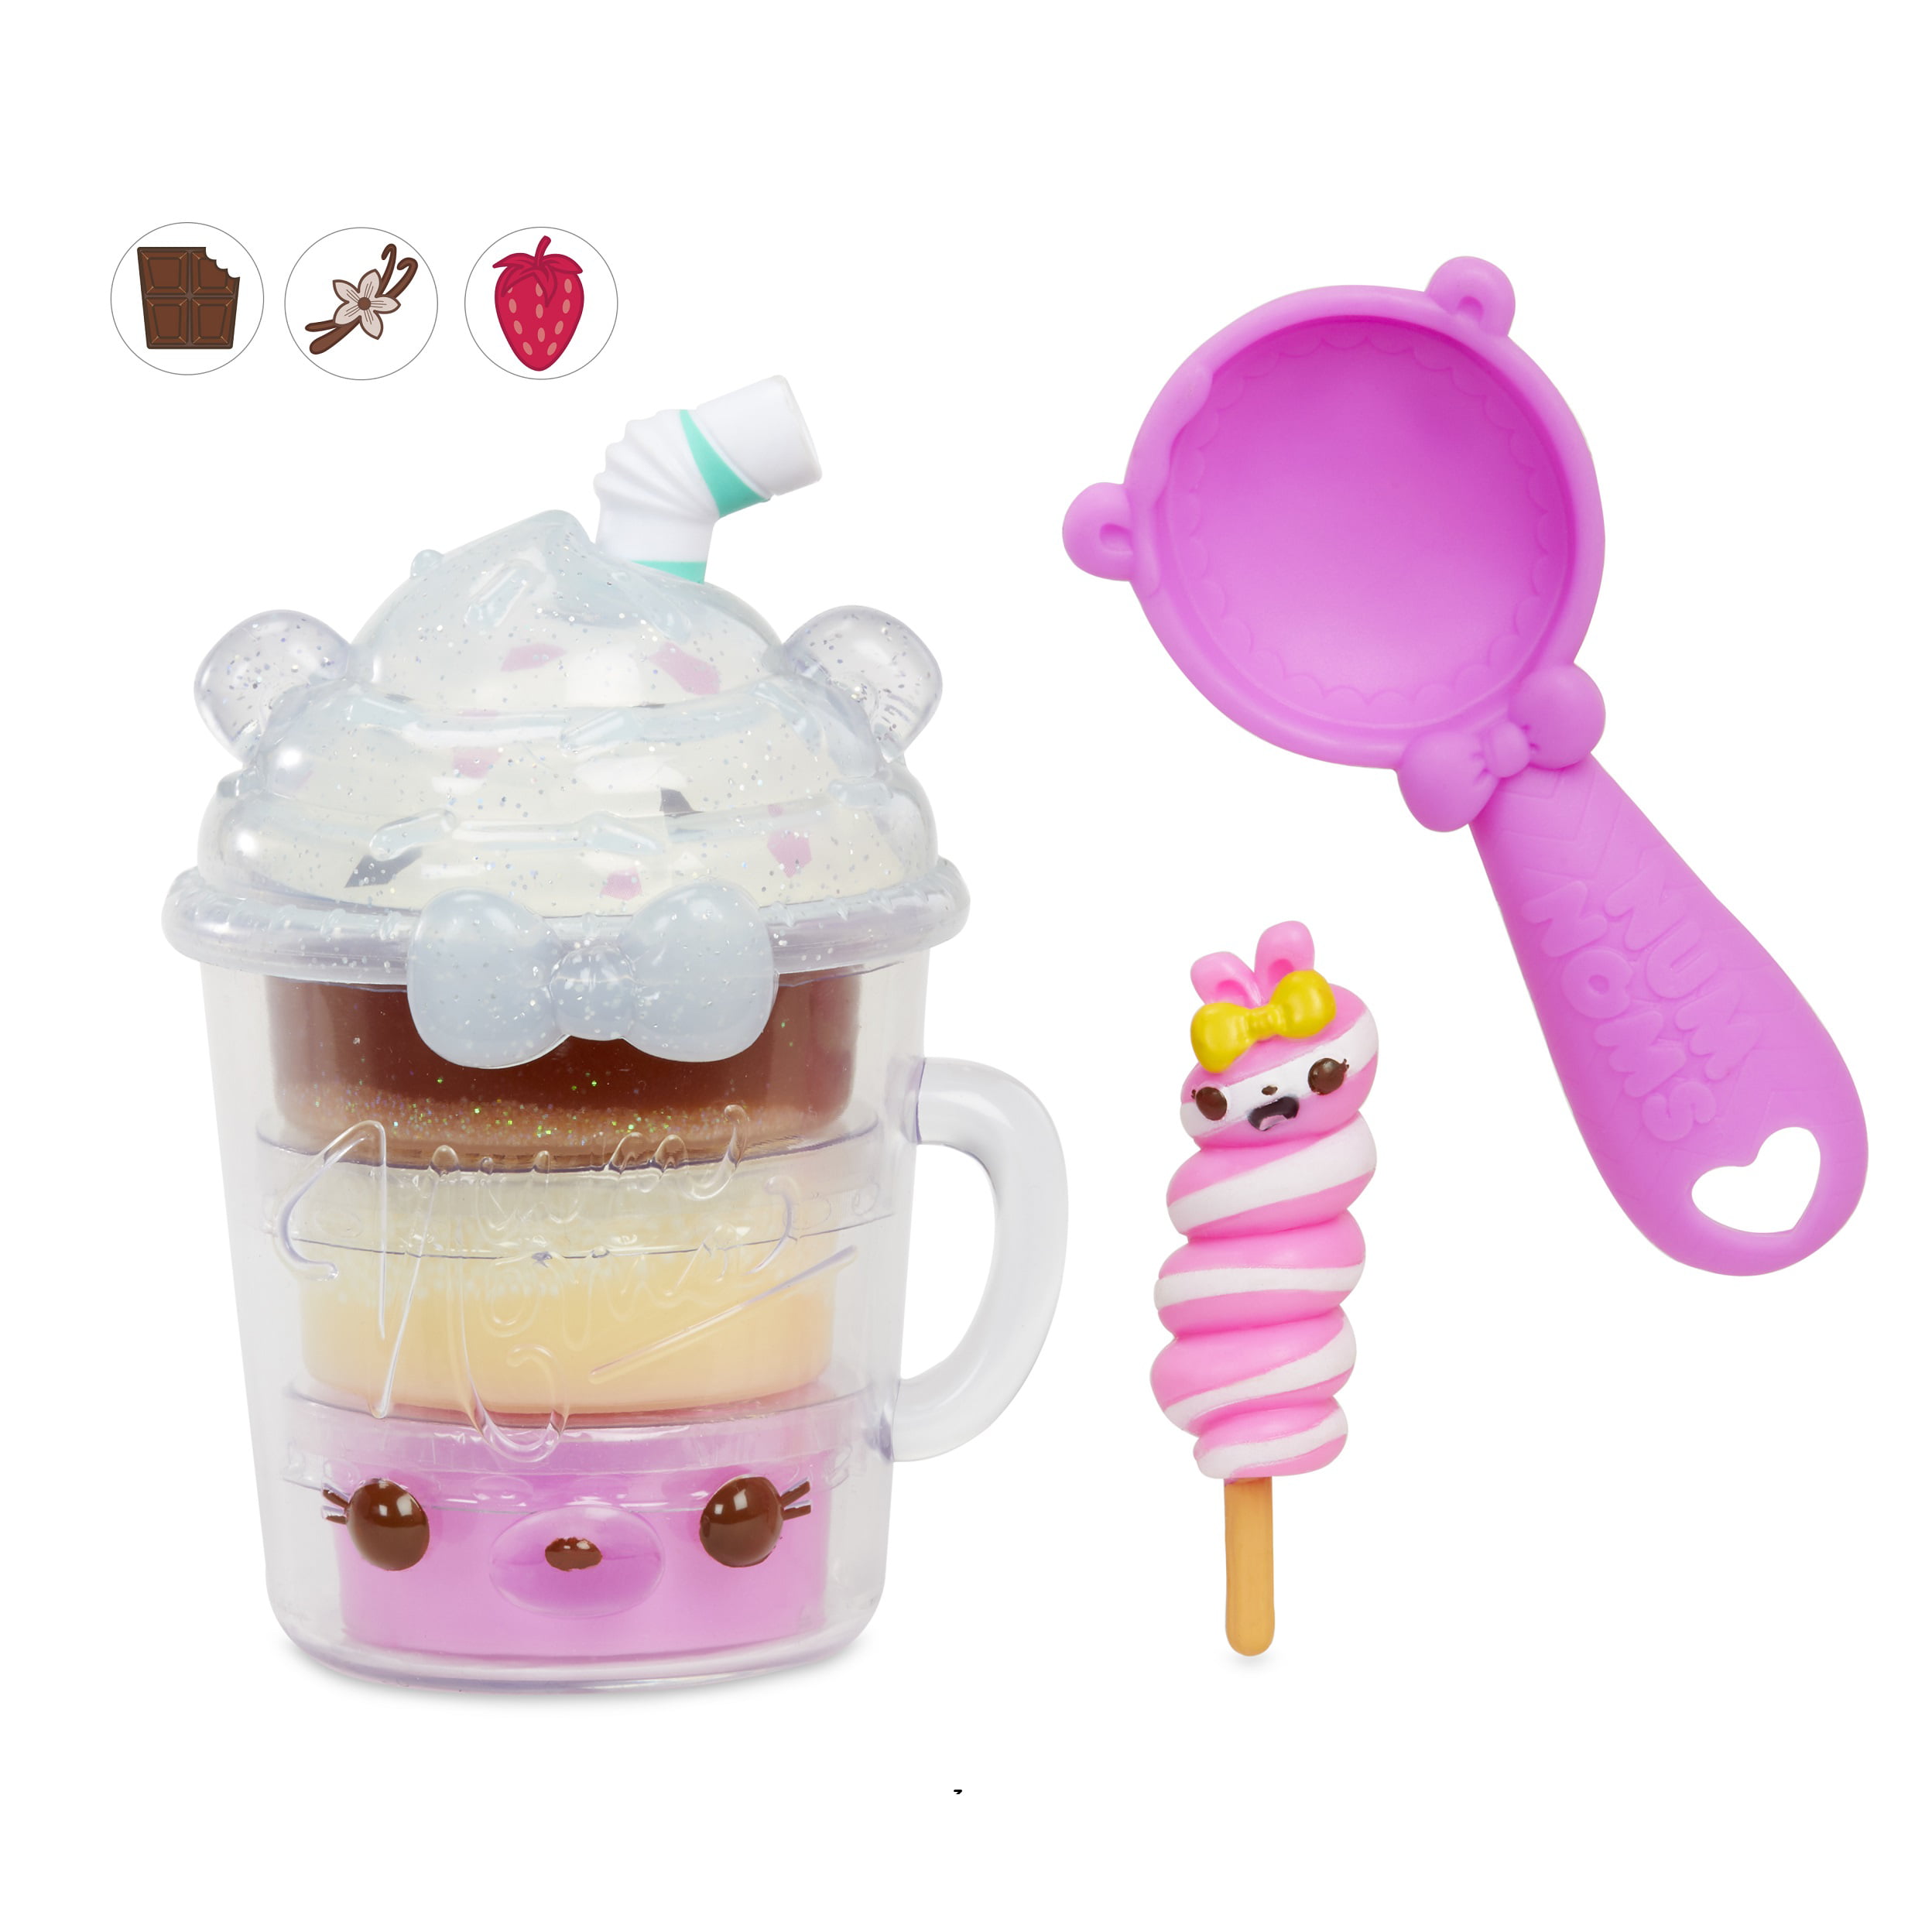  Num Noms Snackables Silly Shakes- Candy Corn Smoothie,  Multicolor : Toys & Games